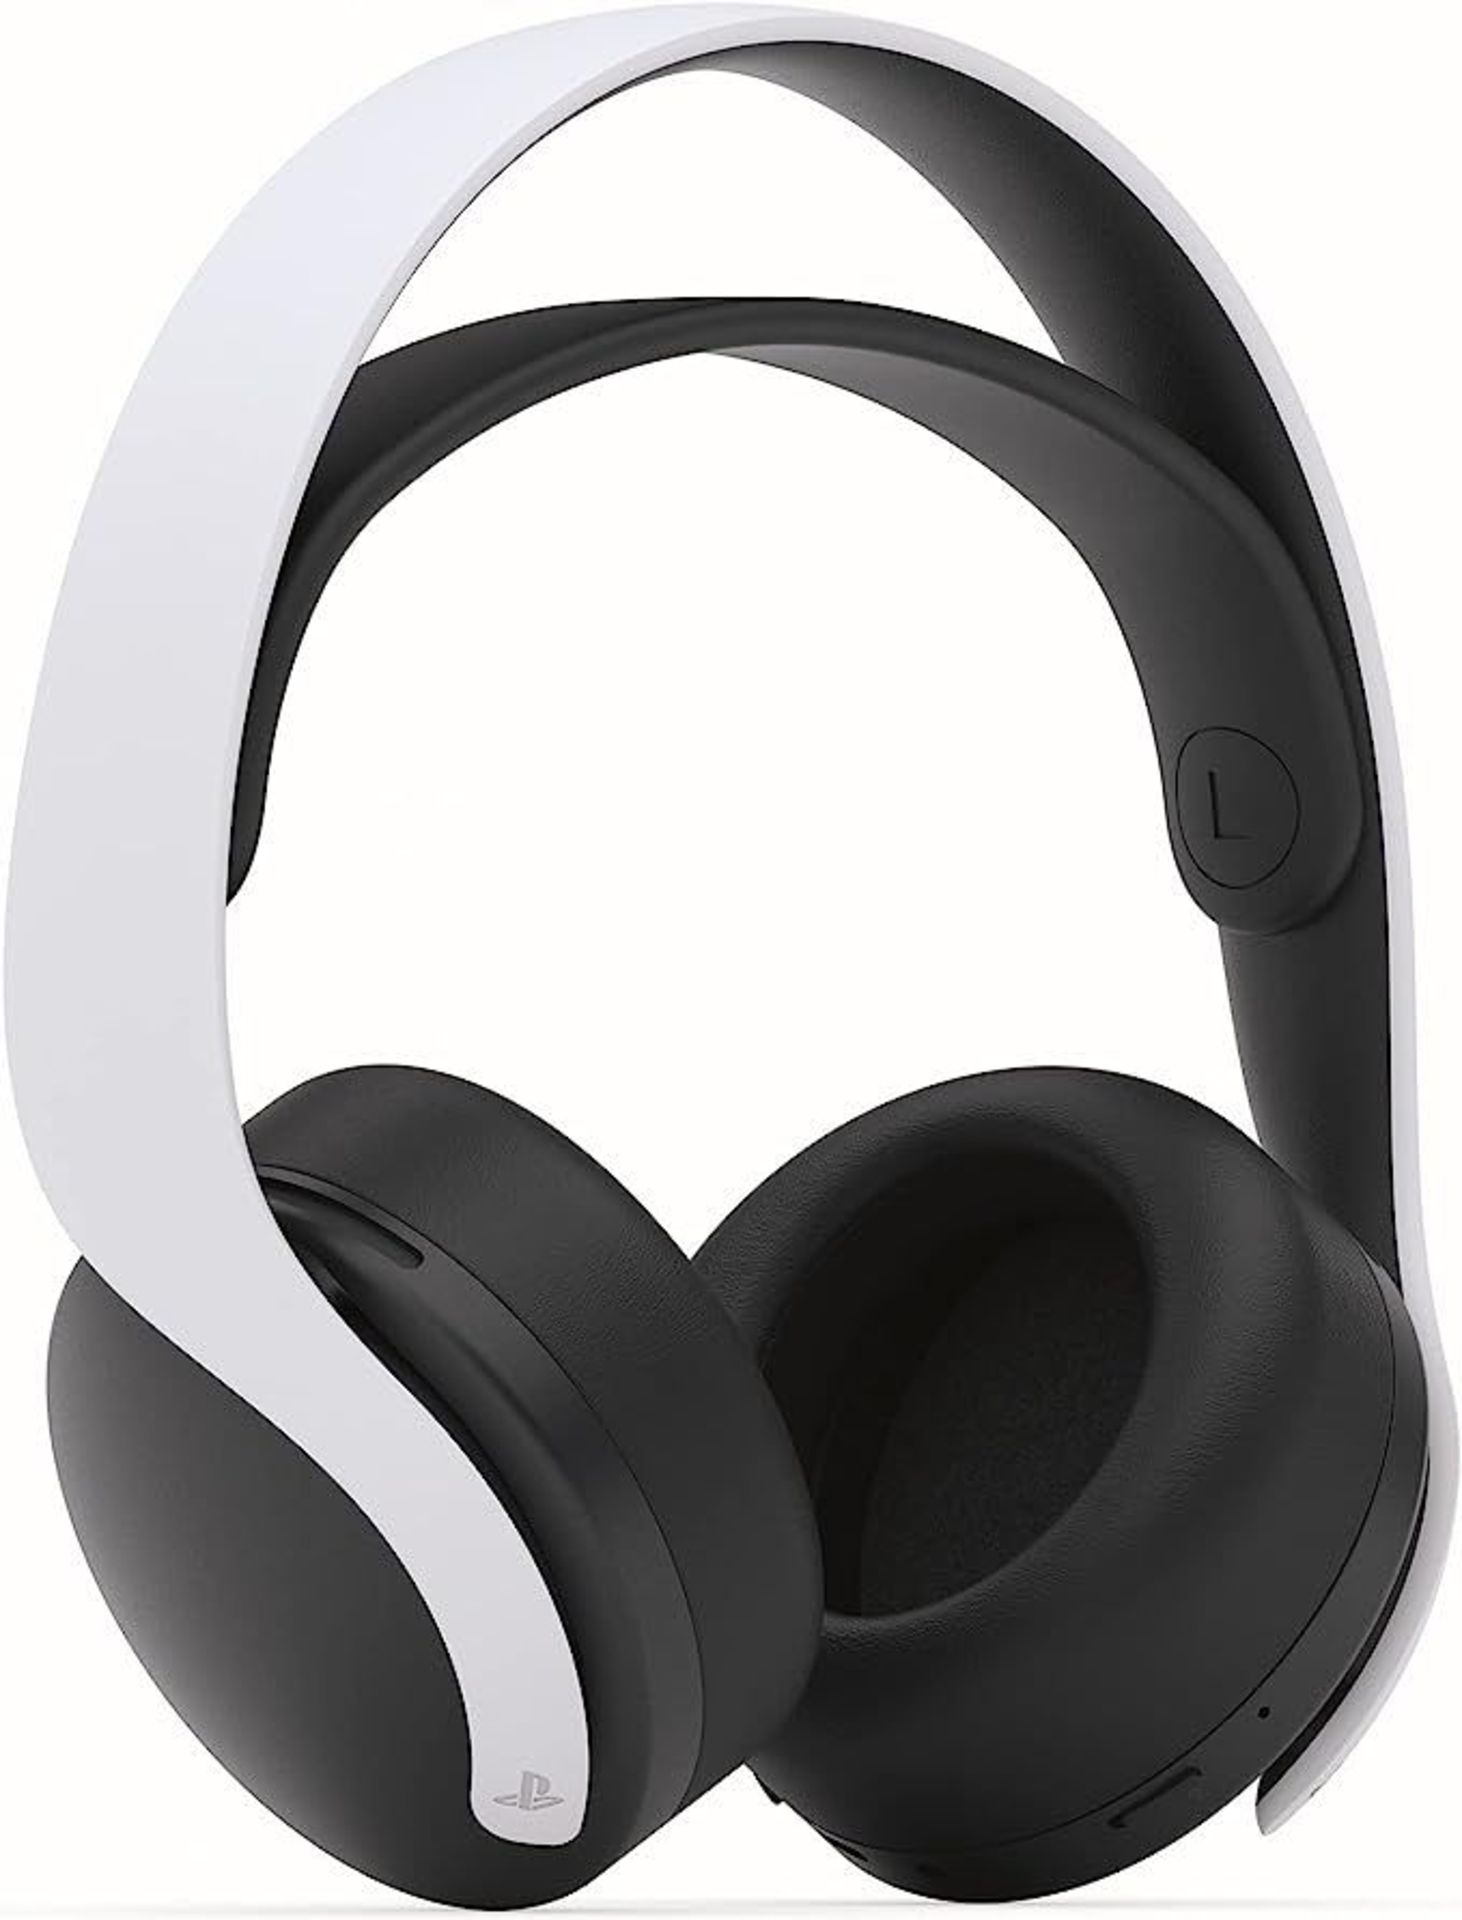 PlayStation 5 PULSE 3D Wireless Headset. - P7. Featuring USB Type-C charging and dual noise-